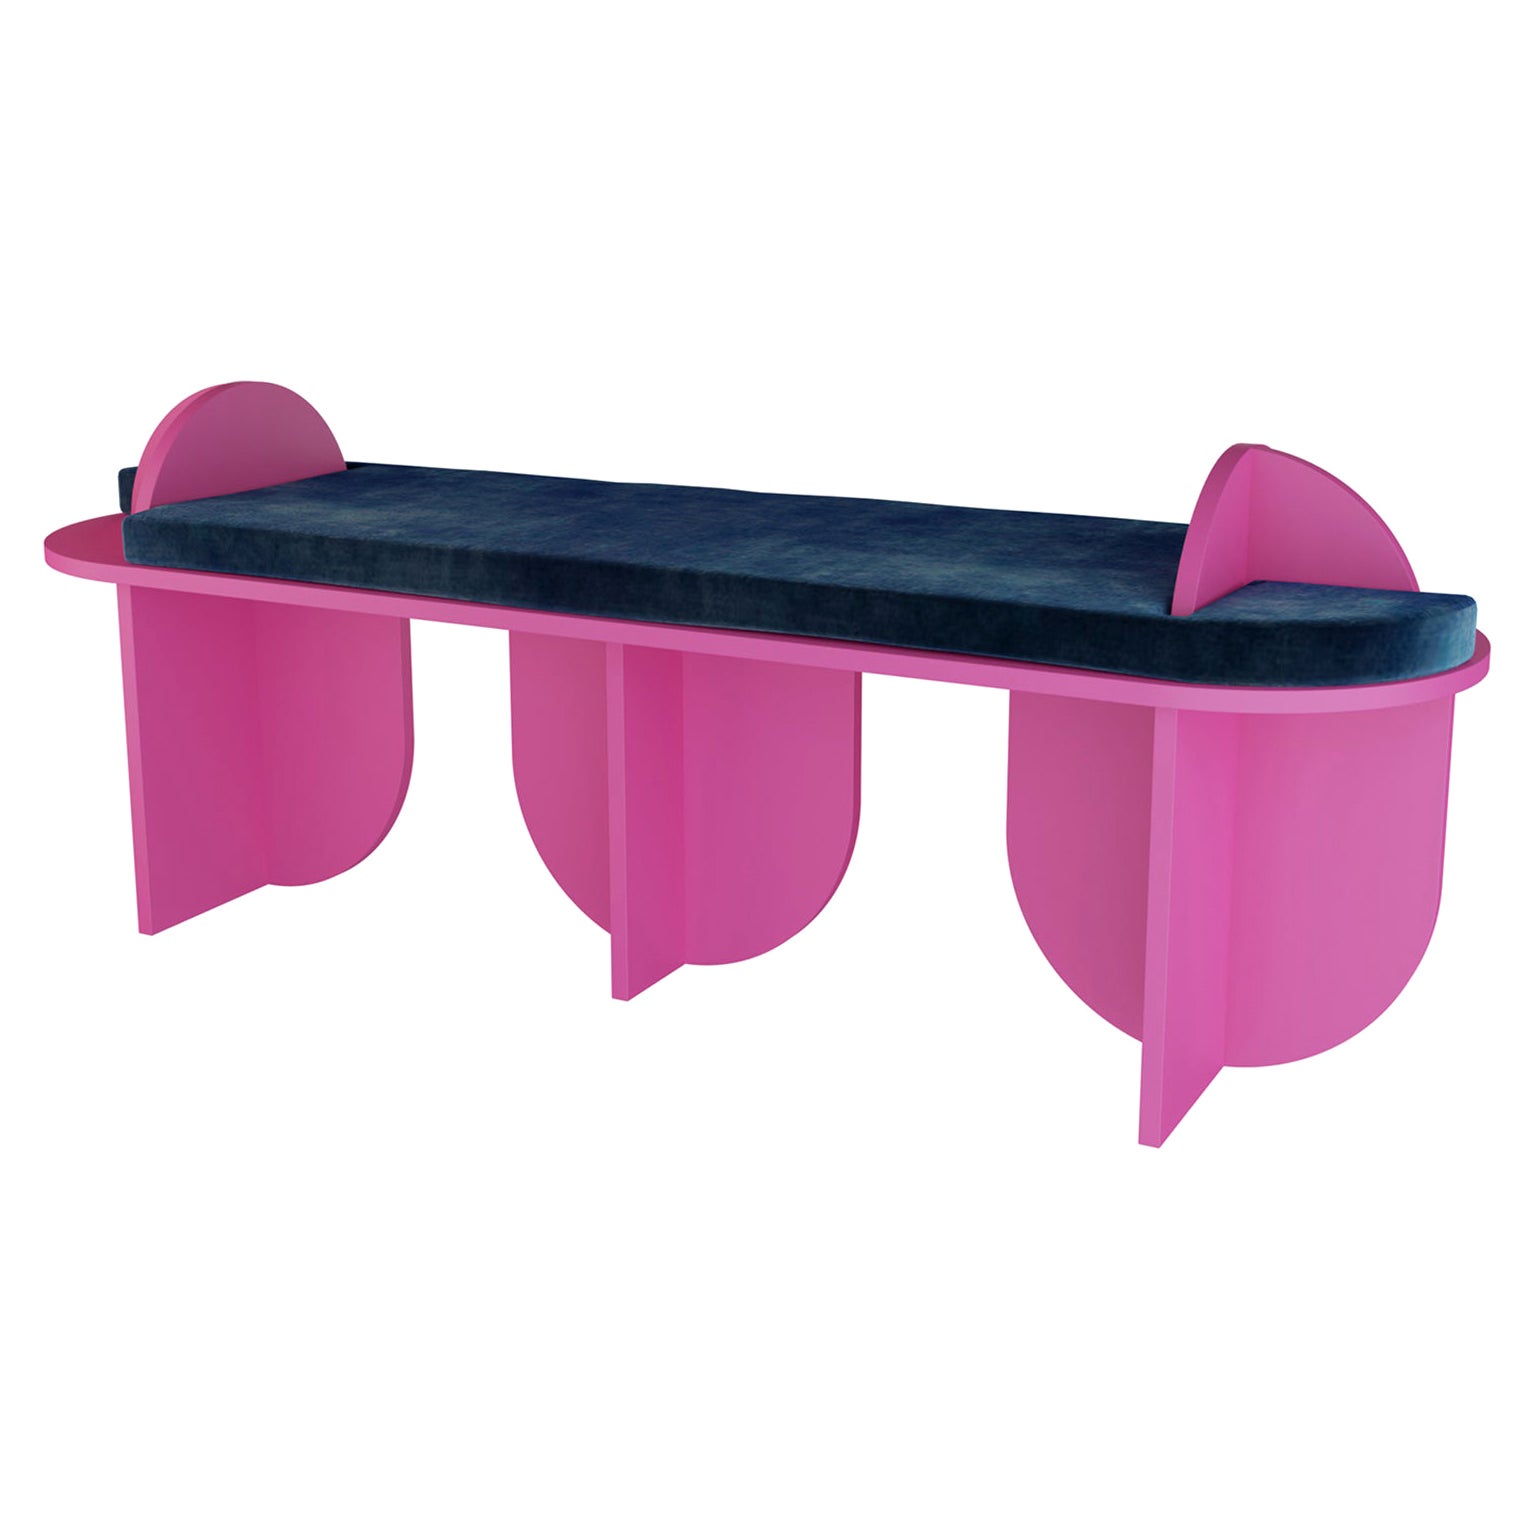 Pink's Not Dead Bench TT06 For Sale